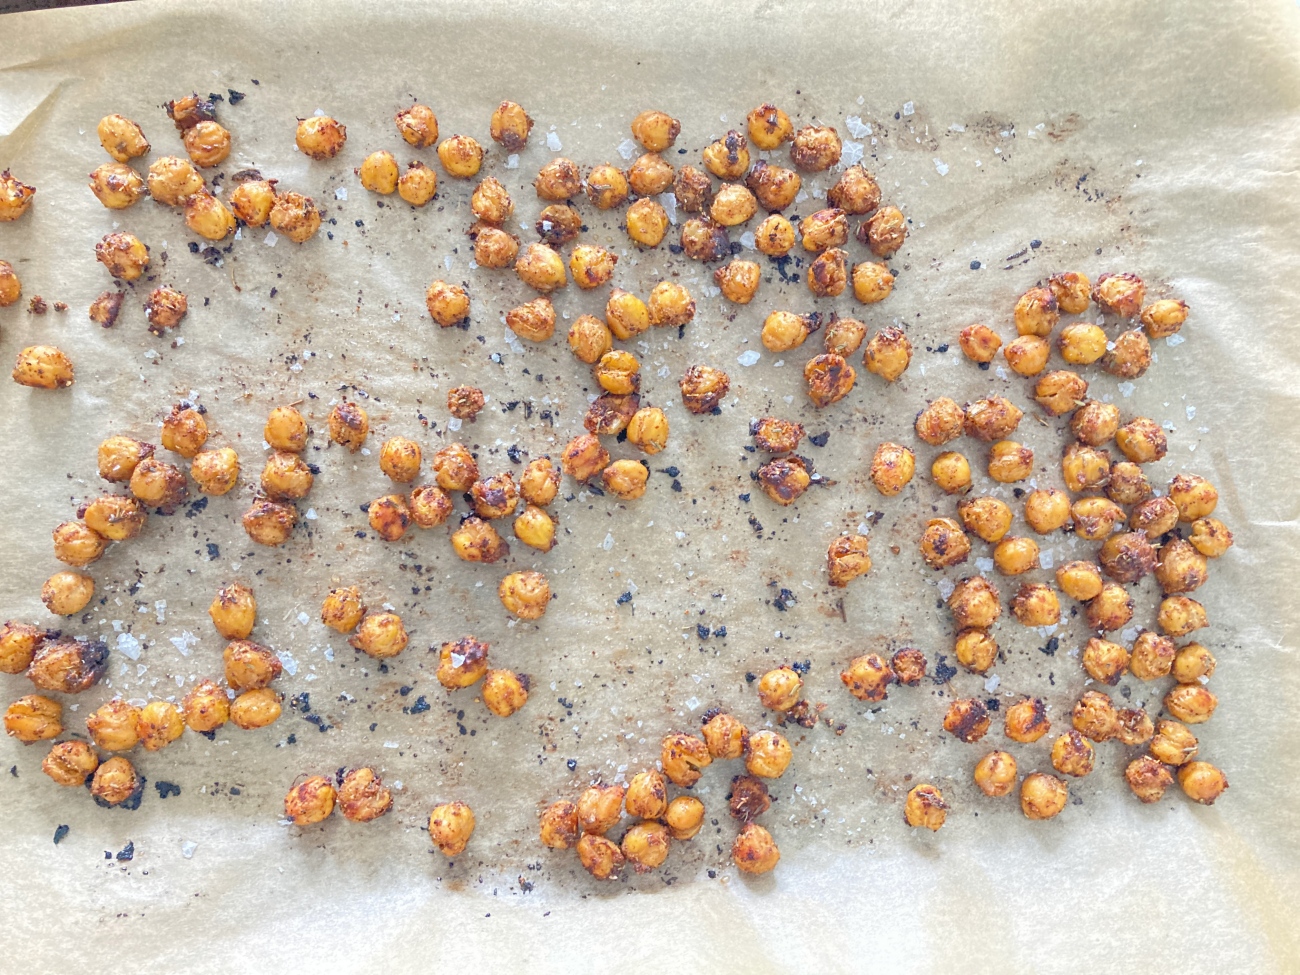 Oven Roasted Spiced Chickpeas
